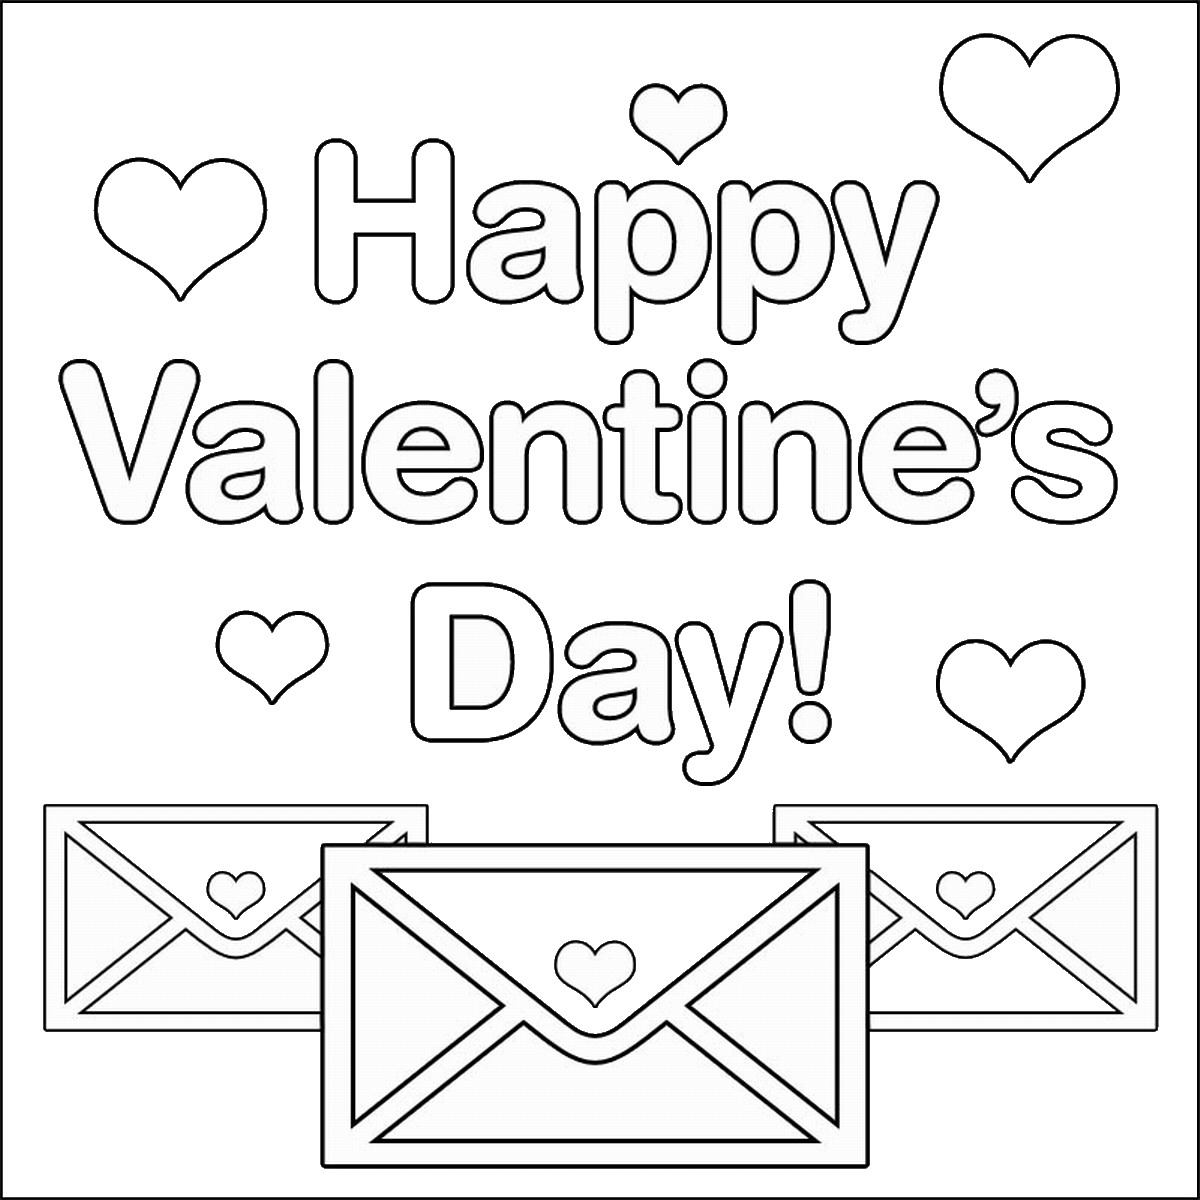 Happy Valentines Day Letters With Hearts Coloring Pages   Coloring ...